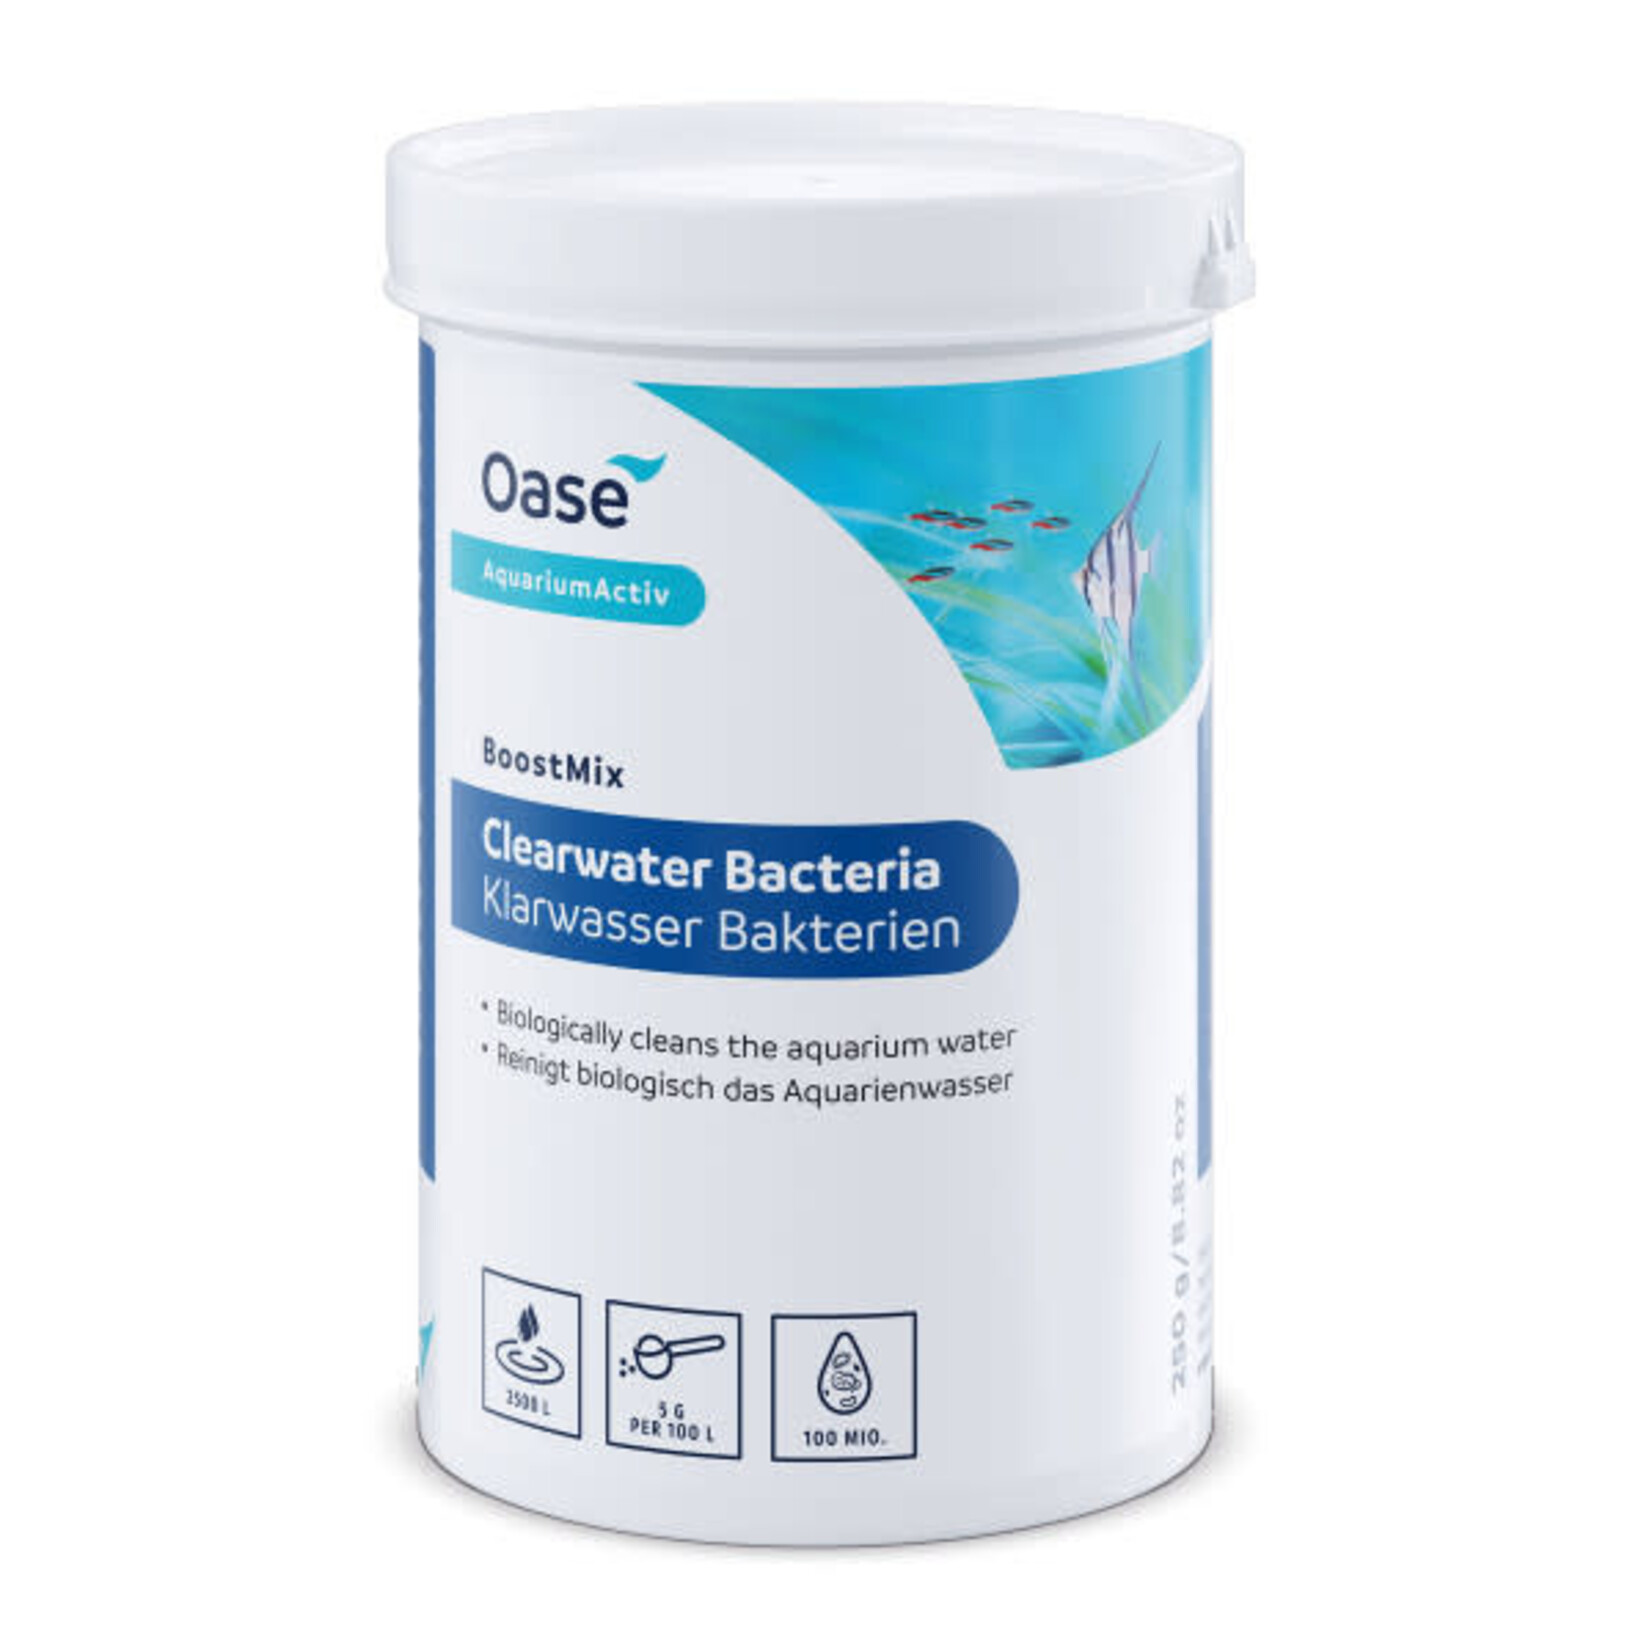 Oase BoostMix Clear water bacteria 250 g